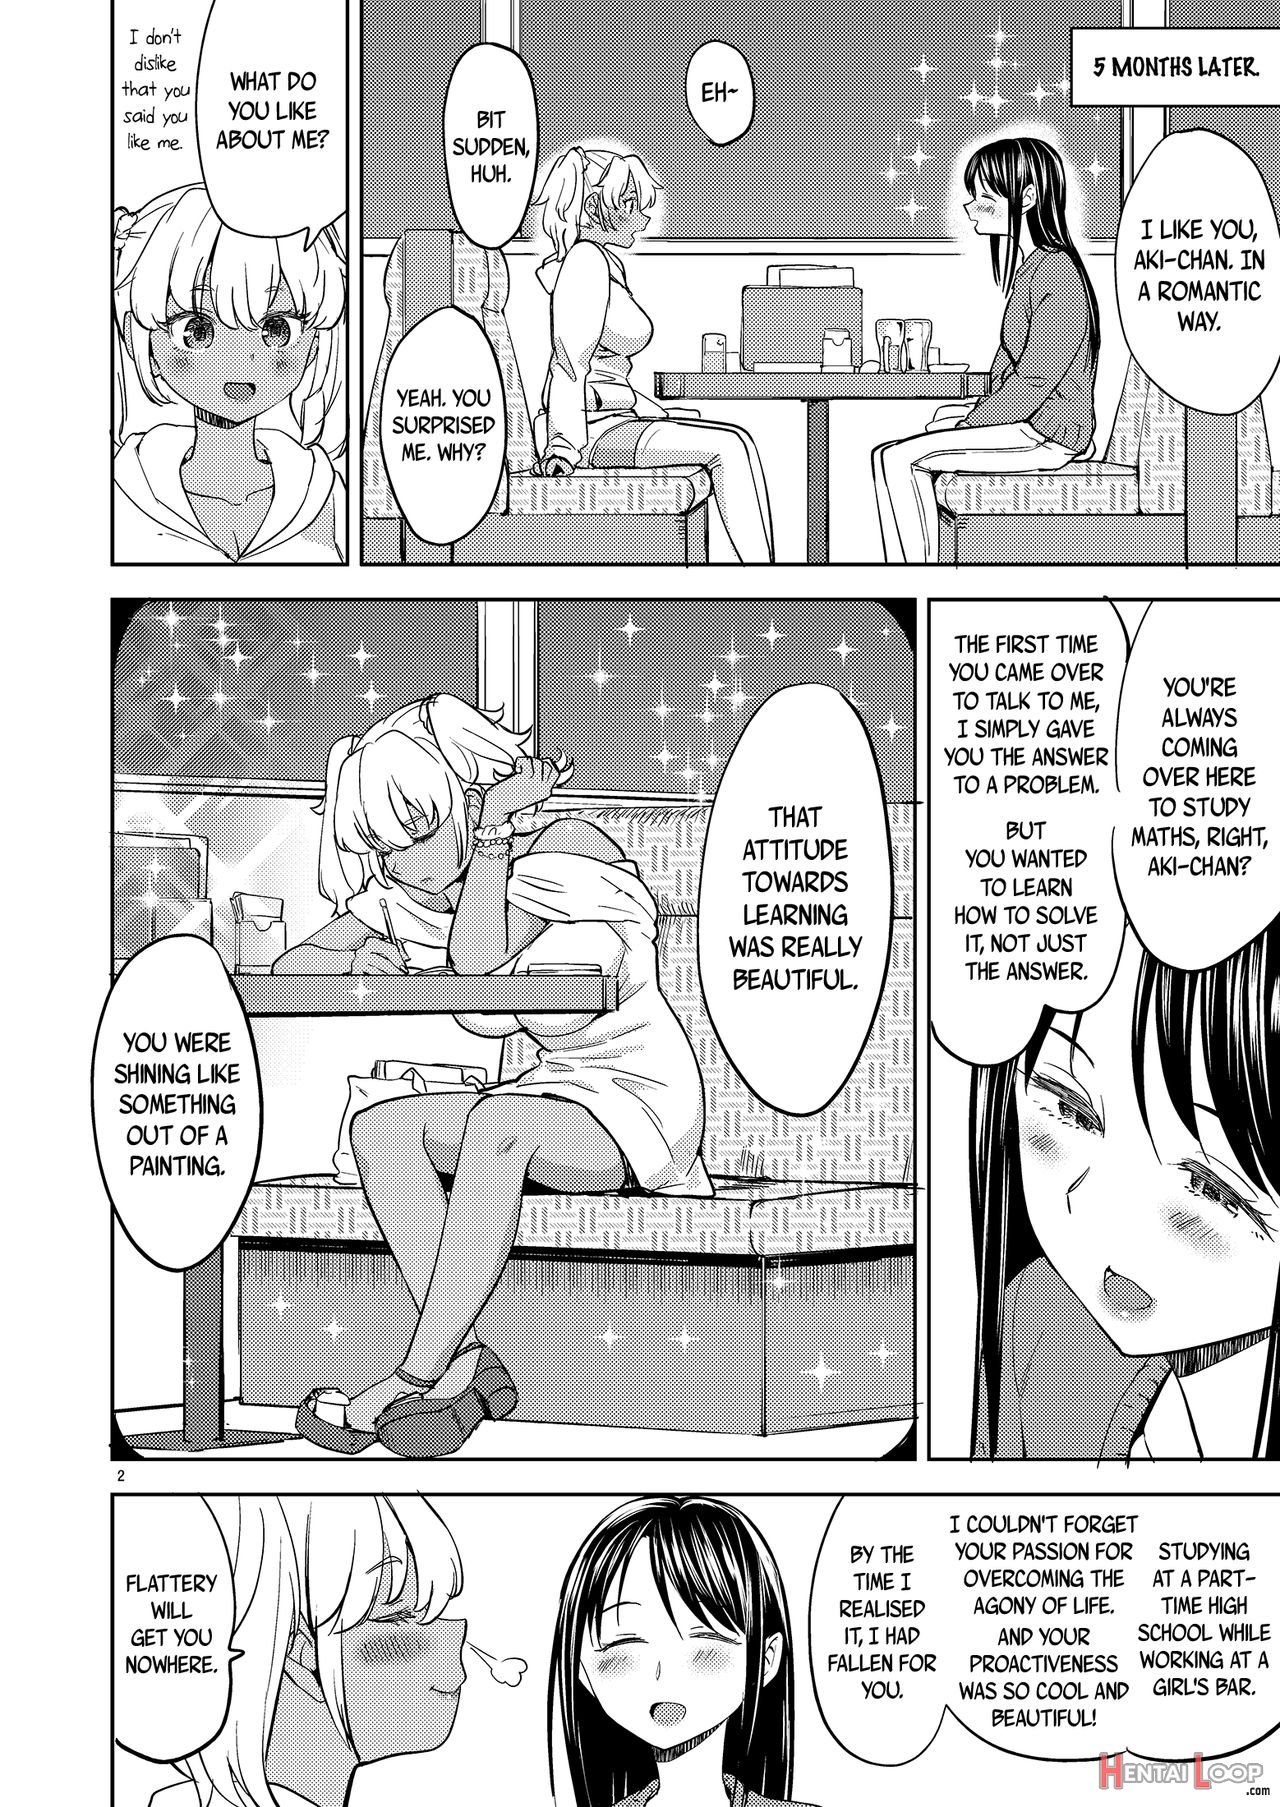 Aki-chan Is Thinking page 3